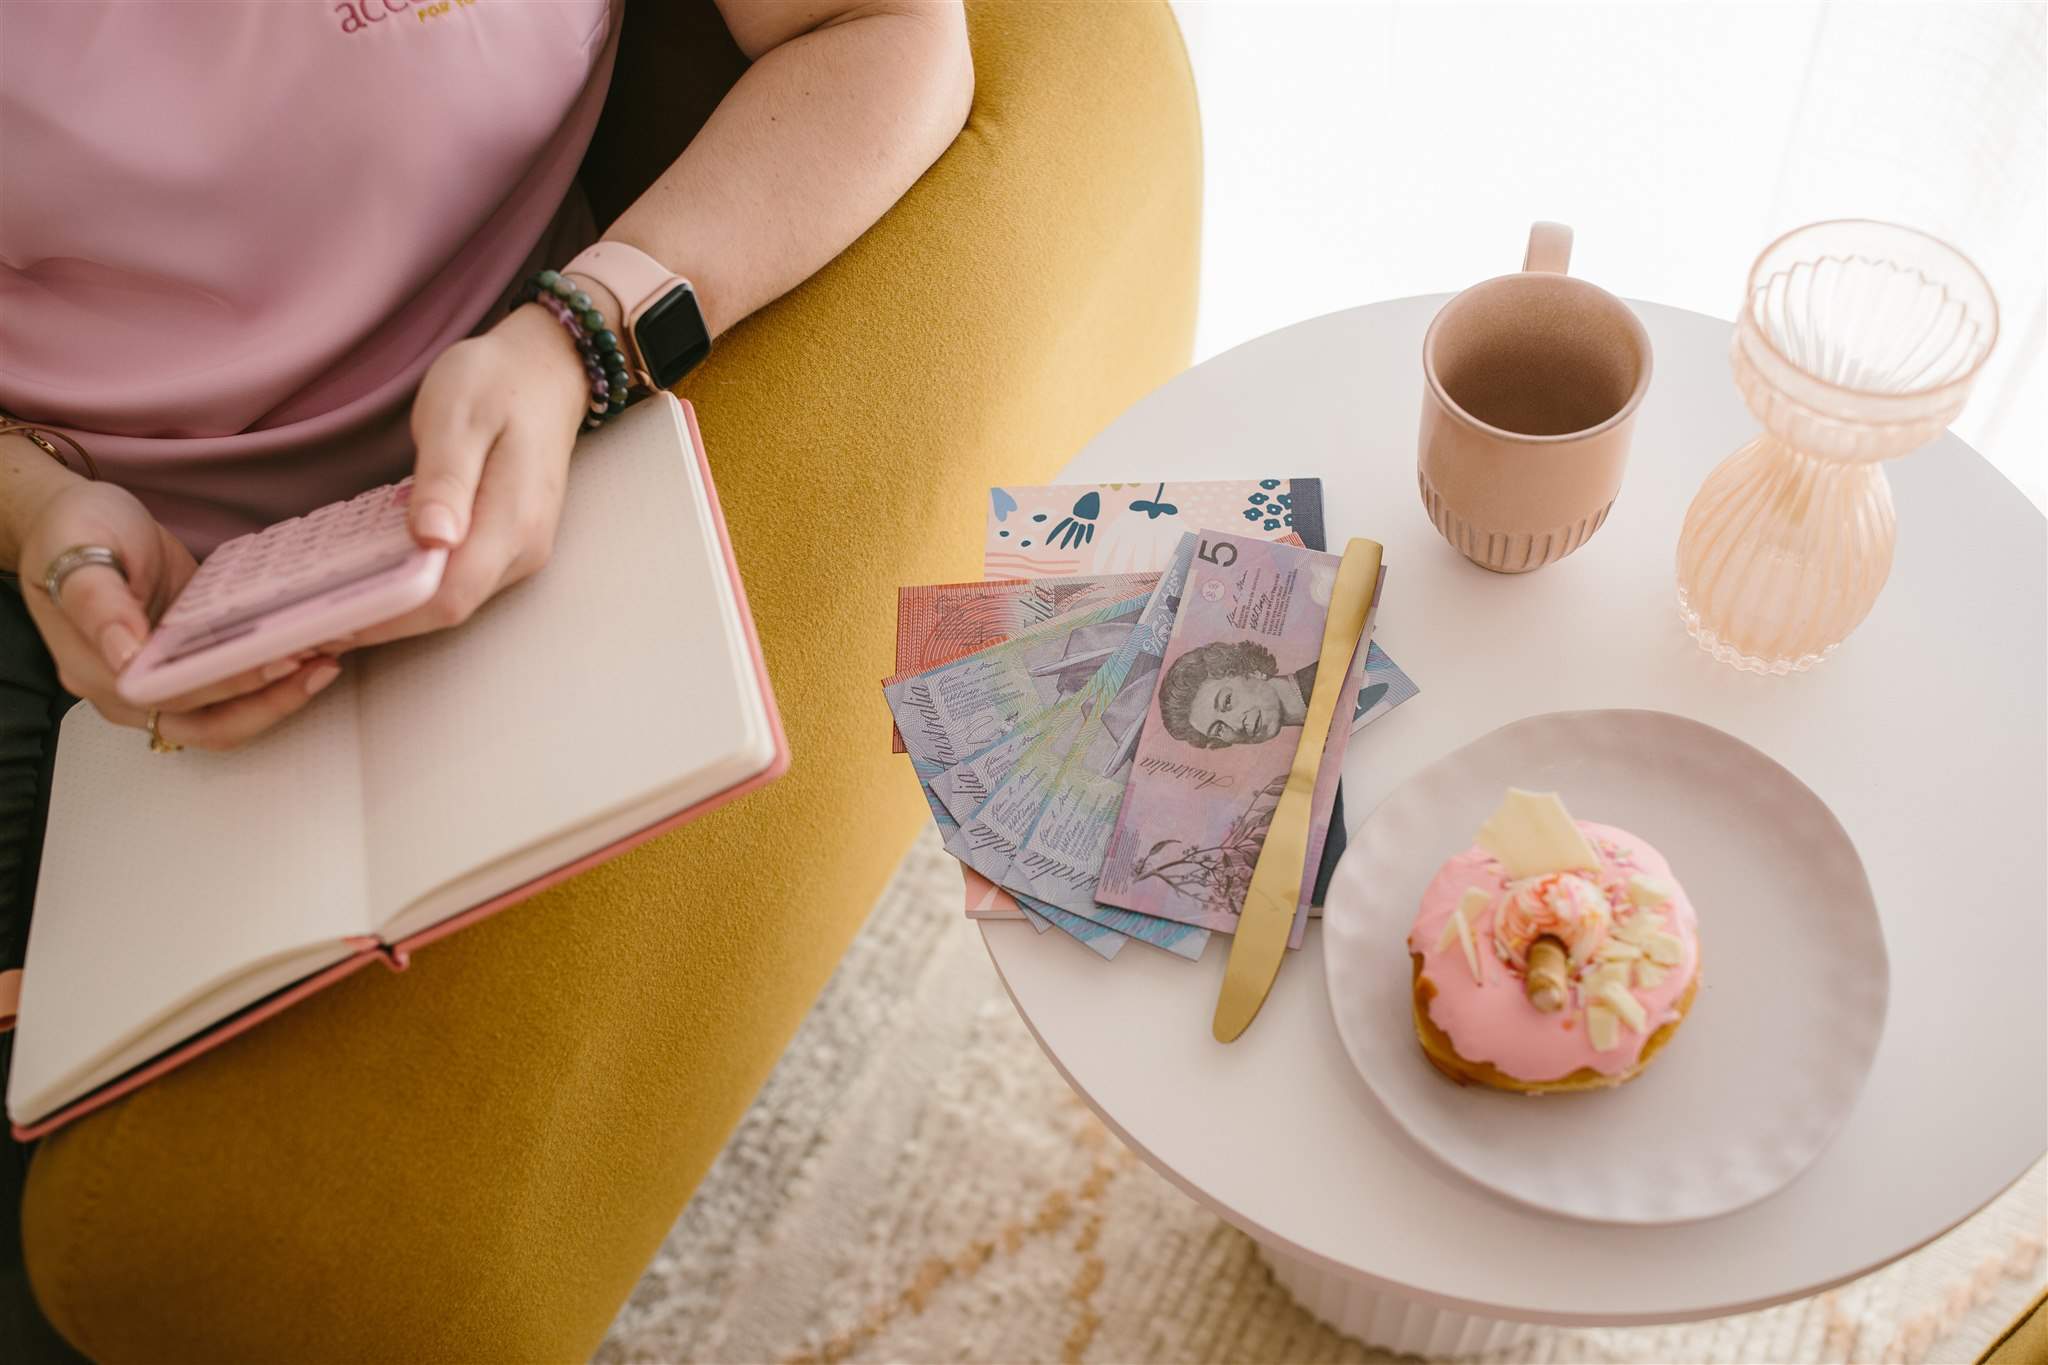 Lisa Turner from Accounted For You - small business bookkeeper resting arm on the side of mustard couch, using a calculator. A white side table with money notes, donut and coffee on it.